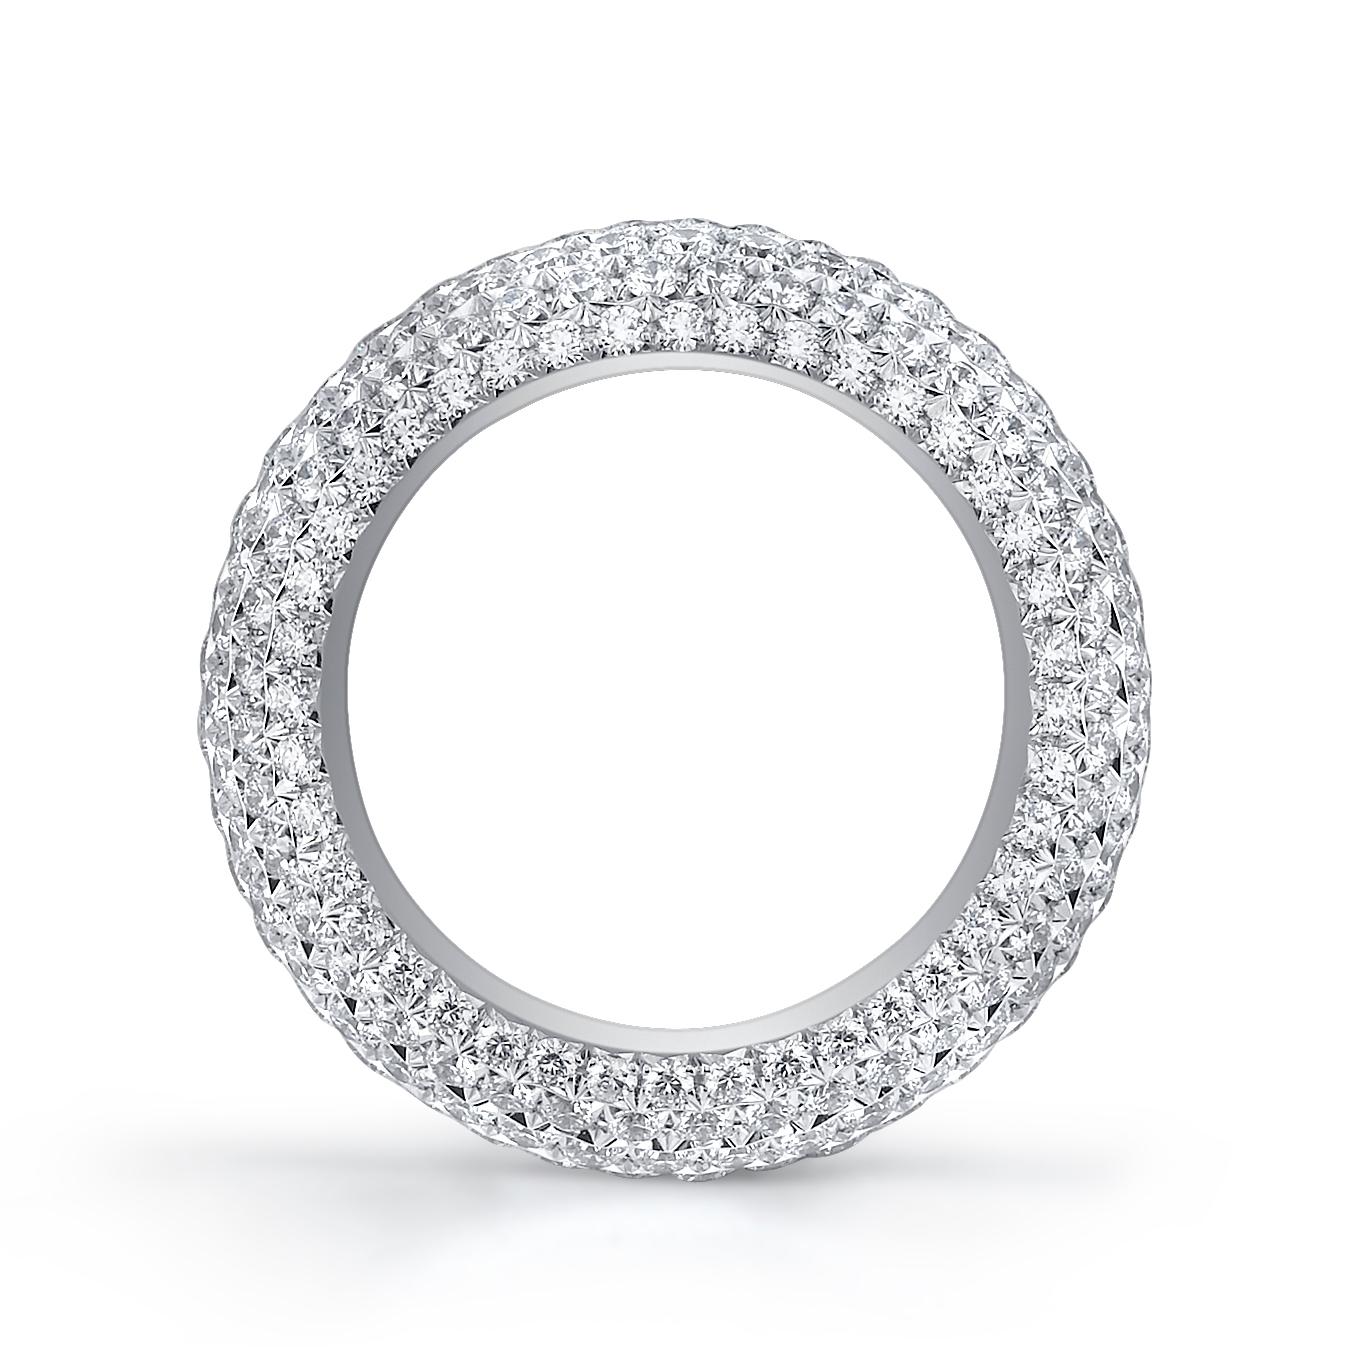 18 Karat White Gold Diamond Band, accented with French Setting Ideal Cut Diamonds. Diamond Quality G/VS2 with a Total Diamond Weight of 5.09CT. French Setting refers to the specific way that small Pavé diamonds are set into the metal of a ring. The